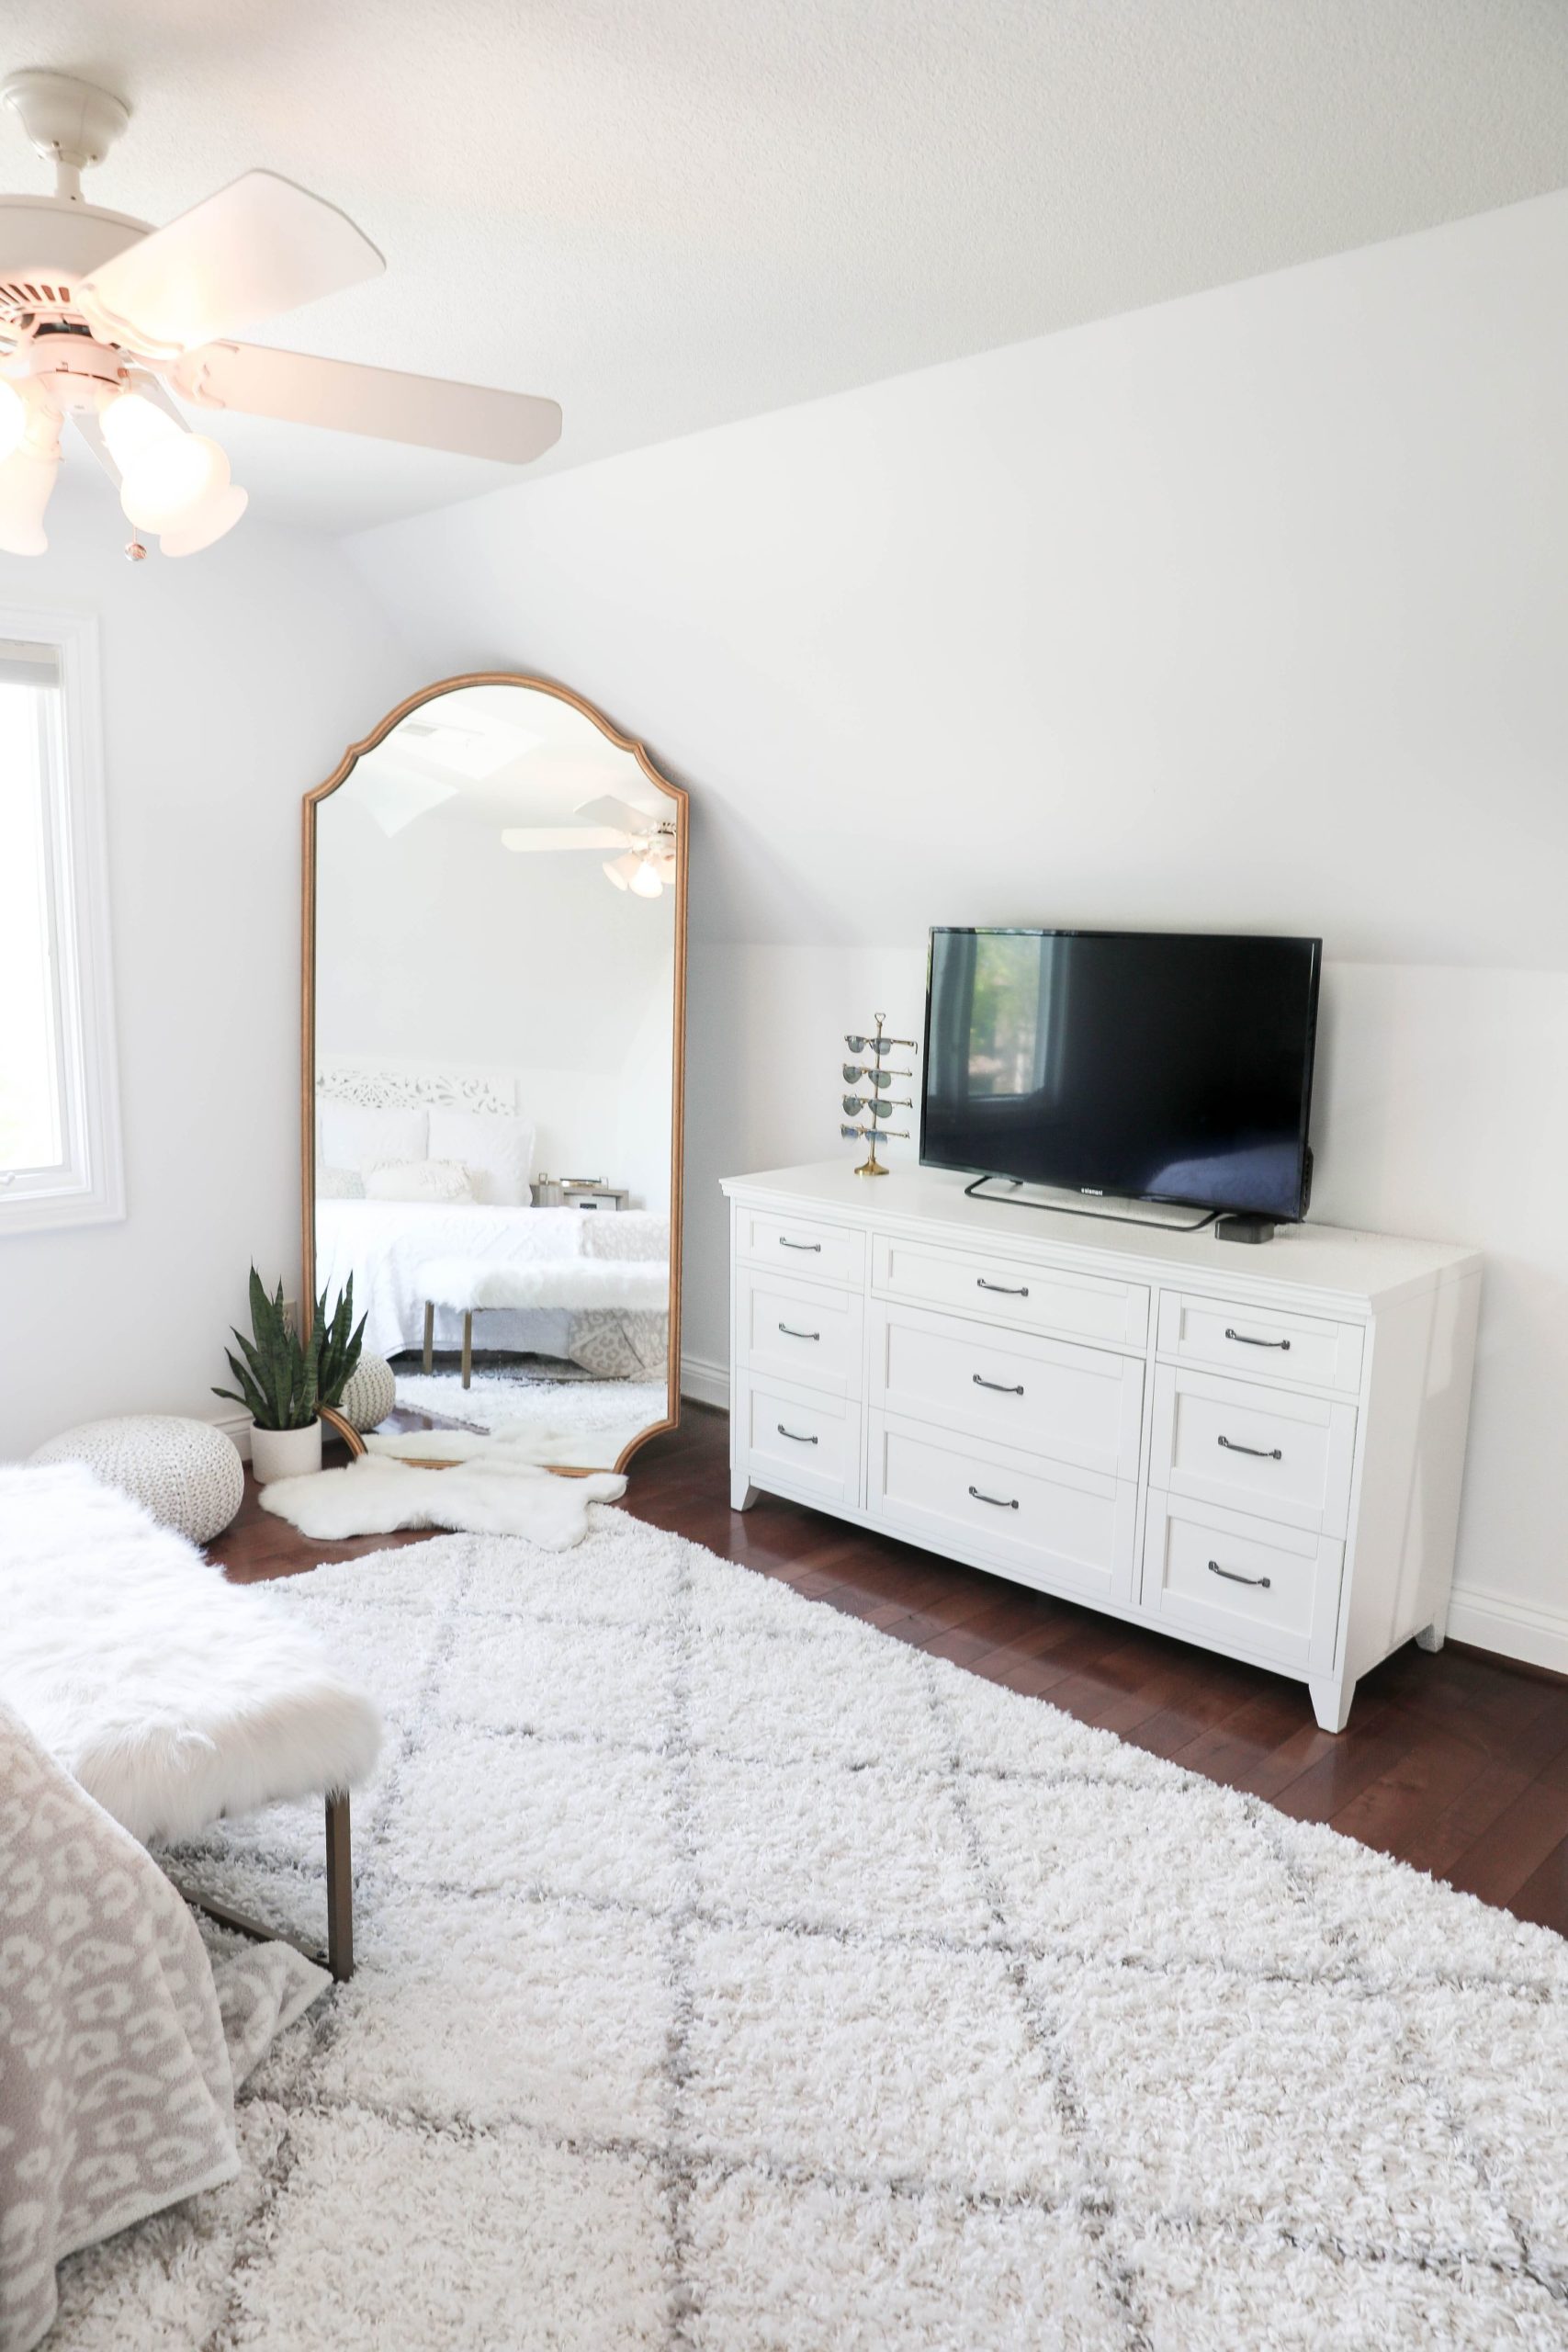 Year Long Room Transformation with Before and After Photos! Bright White Simple Room Decor! Details on Fashion Blog Daily Dose of Charm by Lauren Lindmark